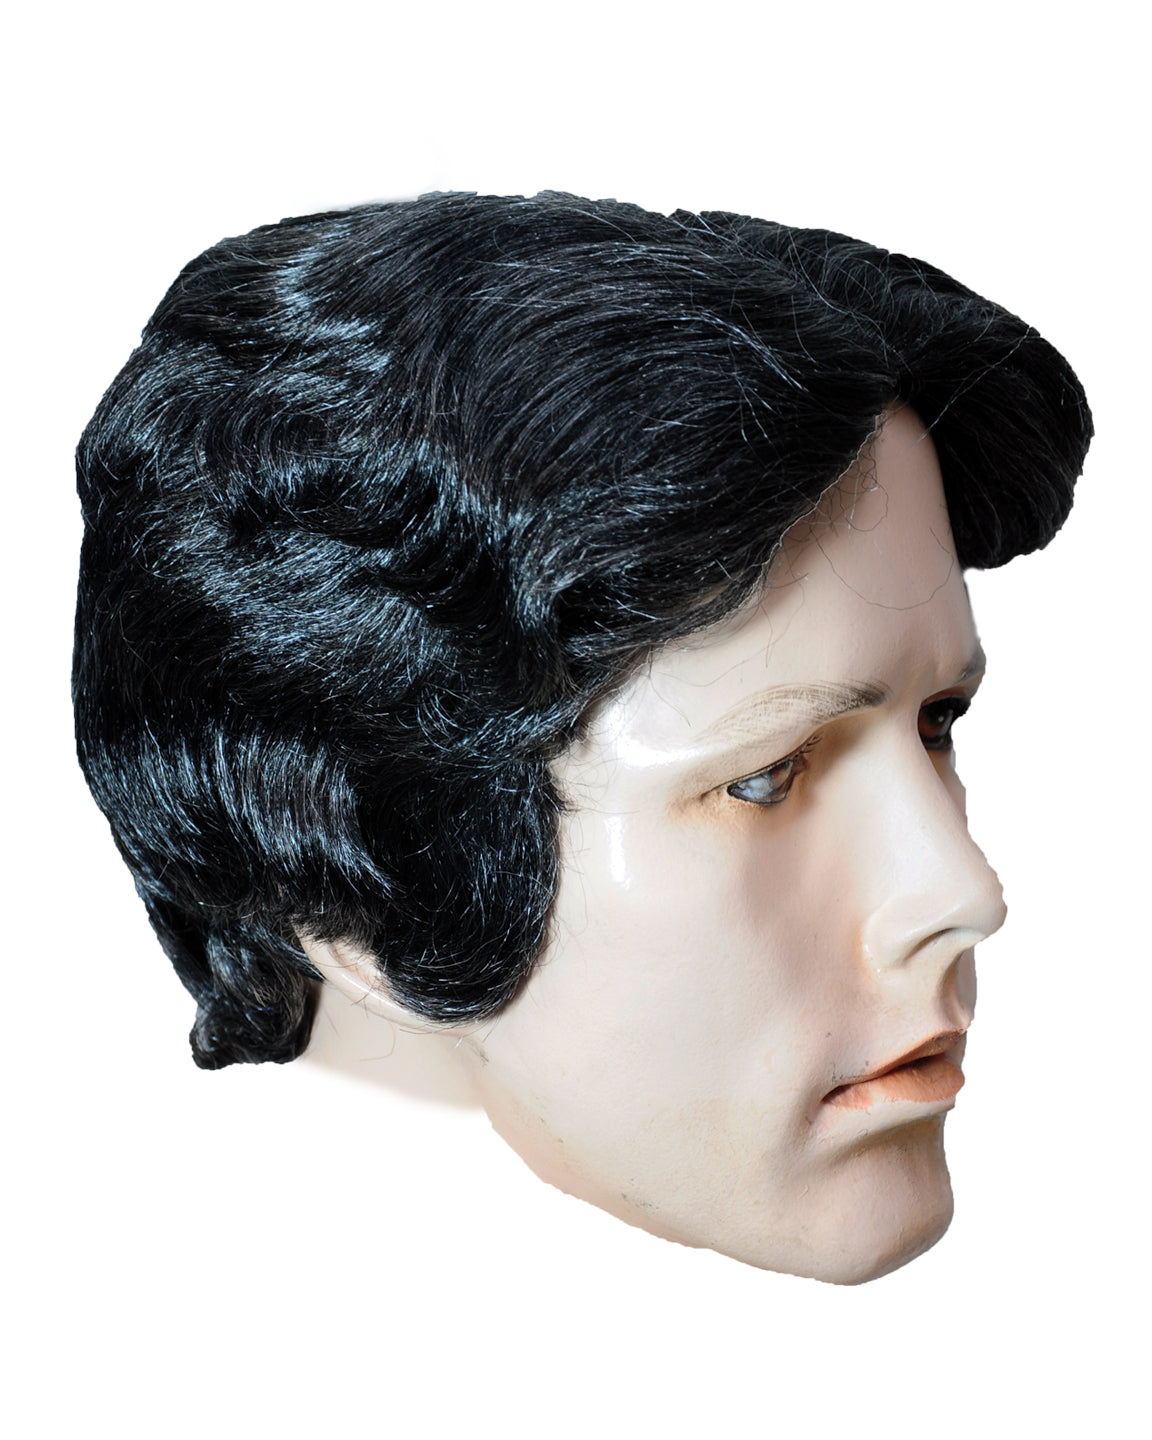 Costume wig, theatre wig, theater wig, mens costume wig